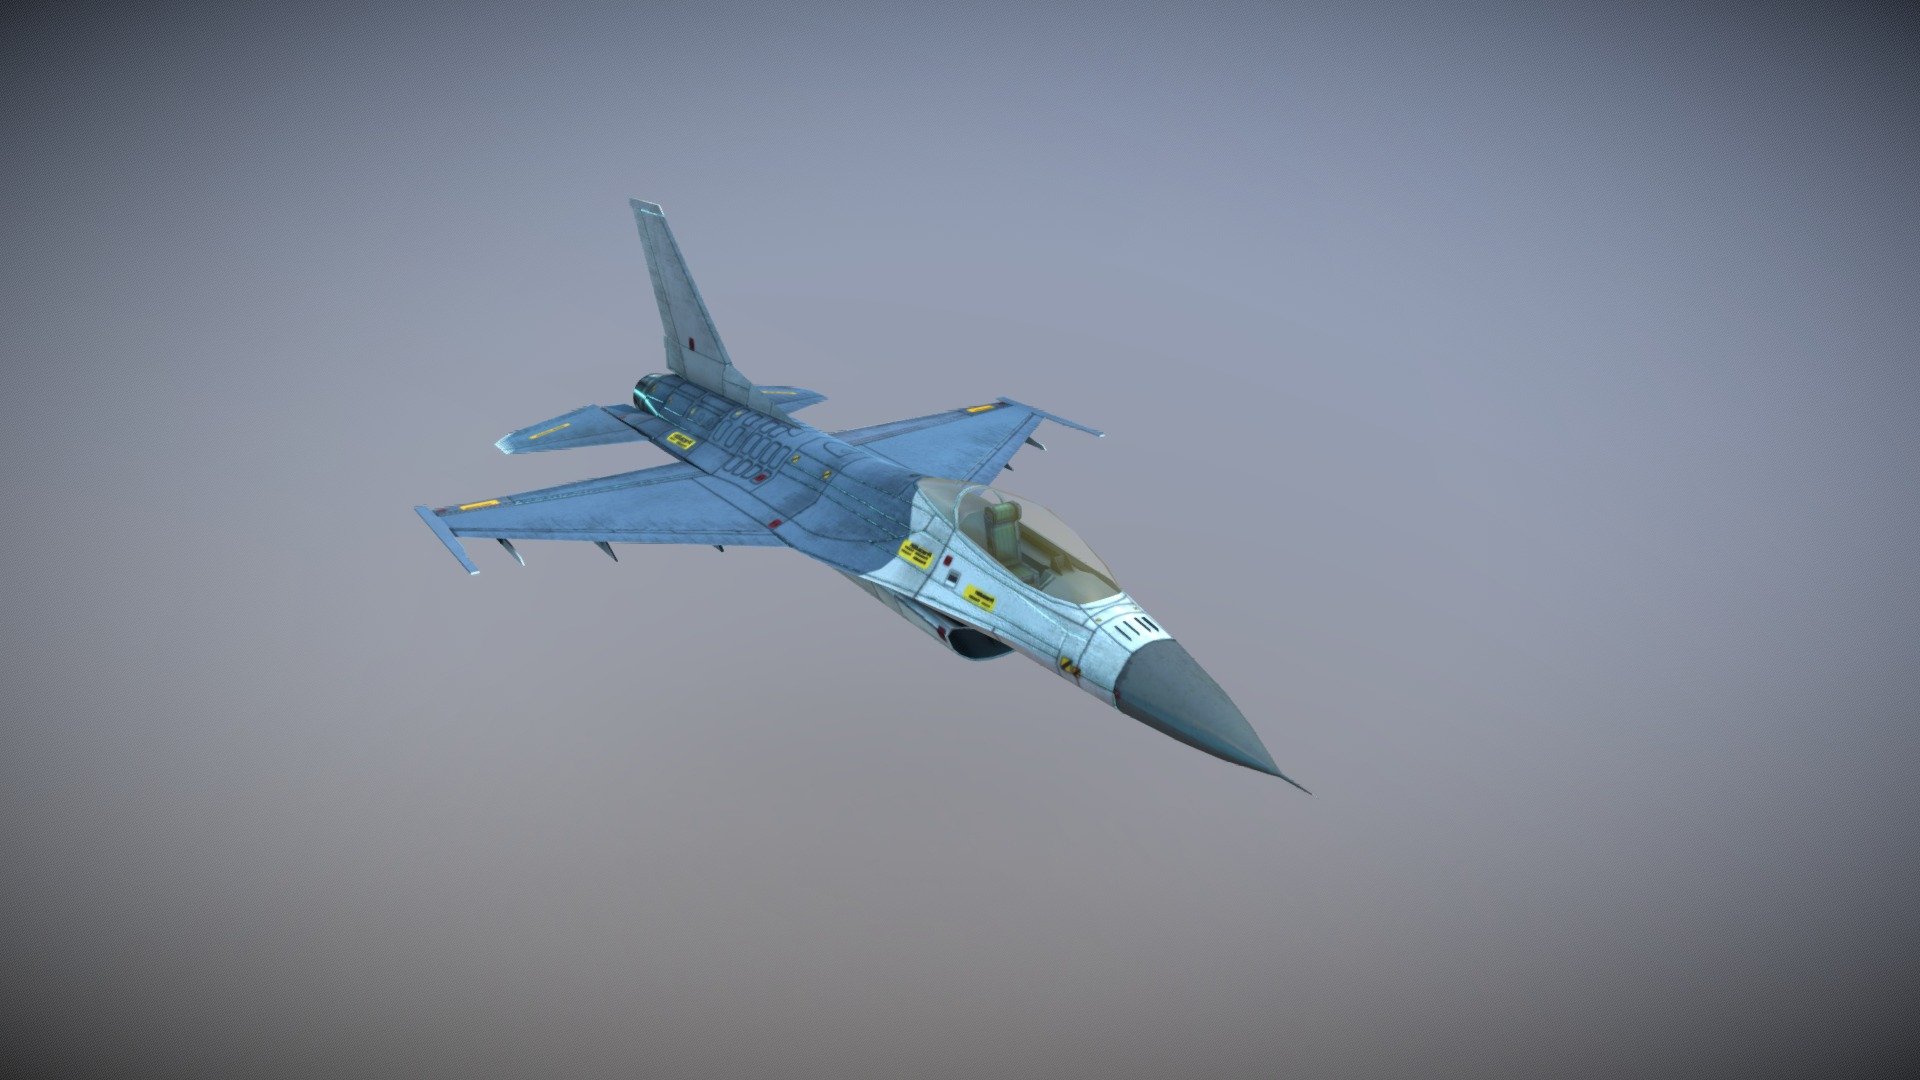 Support me if you can.A coffee for a day will help me to provide free asset for many day.

https://paypal.me/UsmanZia1684?country.x=DE&amp;locale.x=en_US

Low Poly Model for the action. F 16 Is gonna fill your skies with might. Try it and have the coolest feeling 3d model